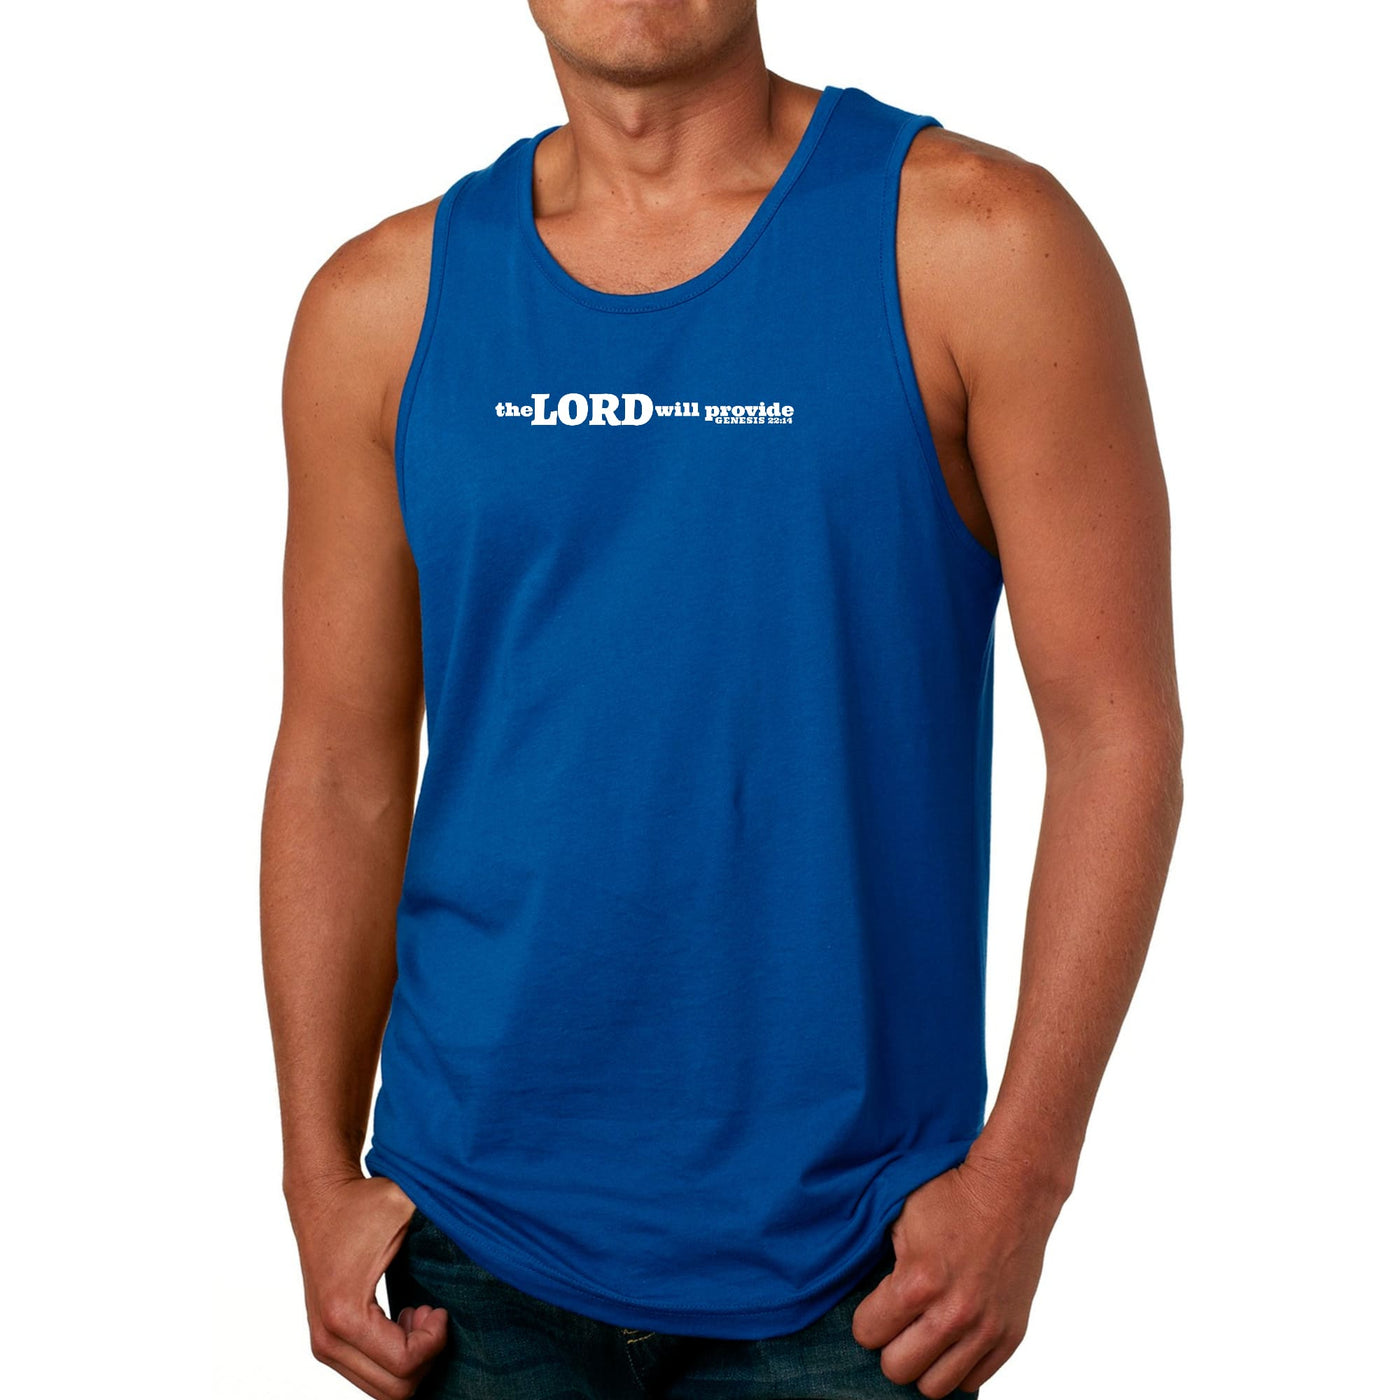 Mens Tank Top Fitness T-shirt The Lord Will Provide Print - Tops